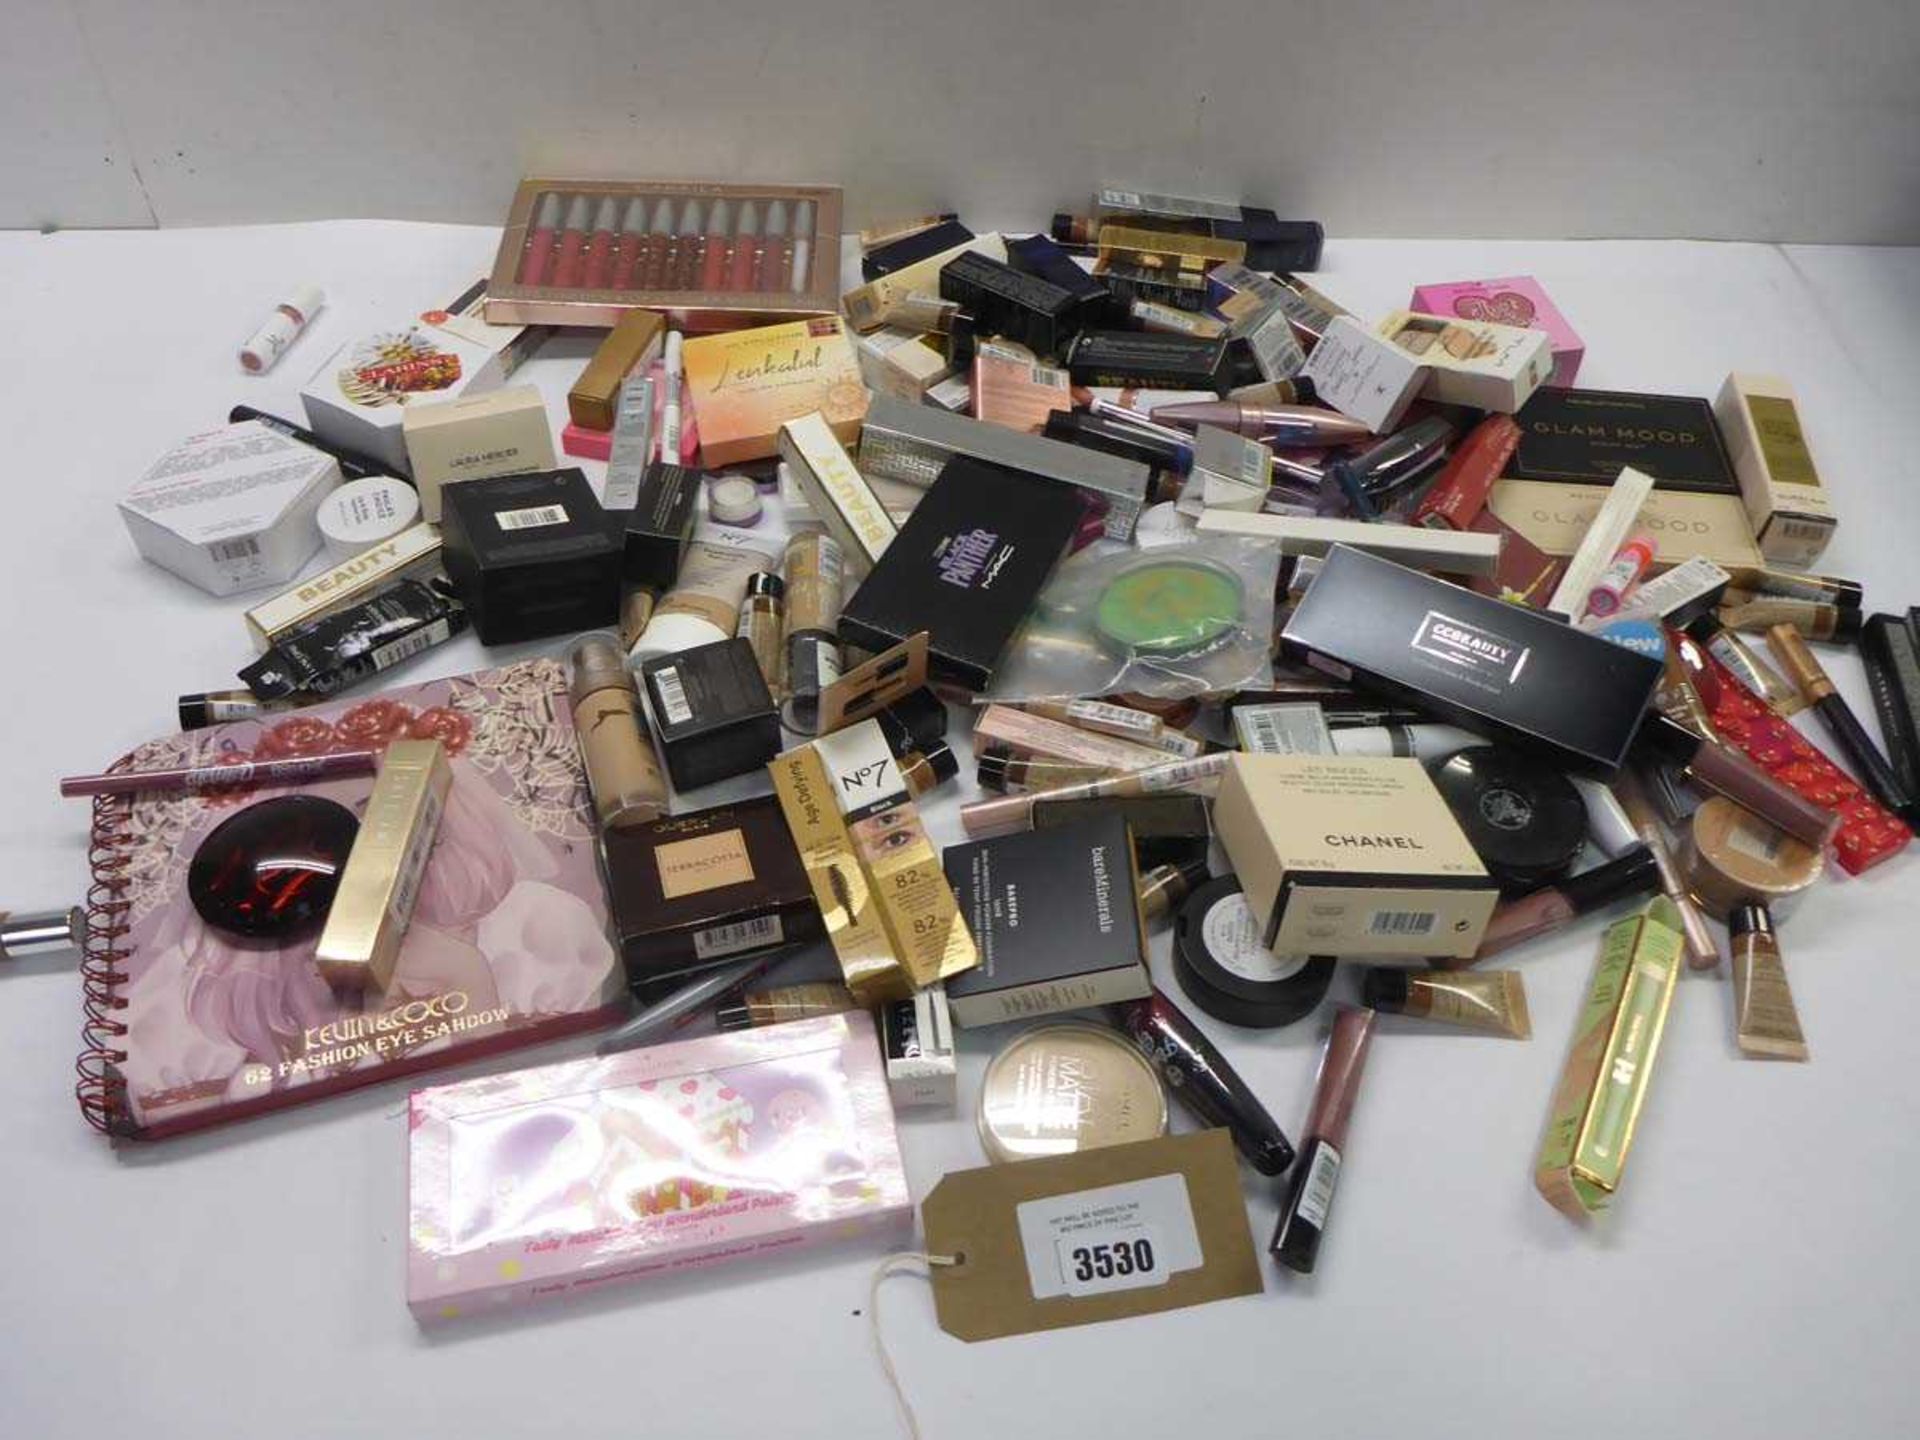 +VAT Large quantity of assorted cosmetics including Chanel, bareMinerals, Revolution, Guerlain,